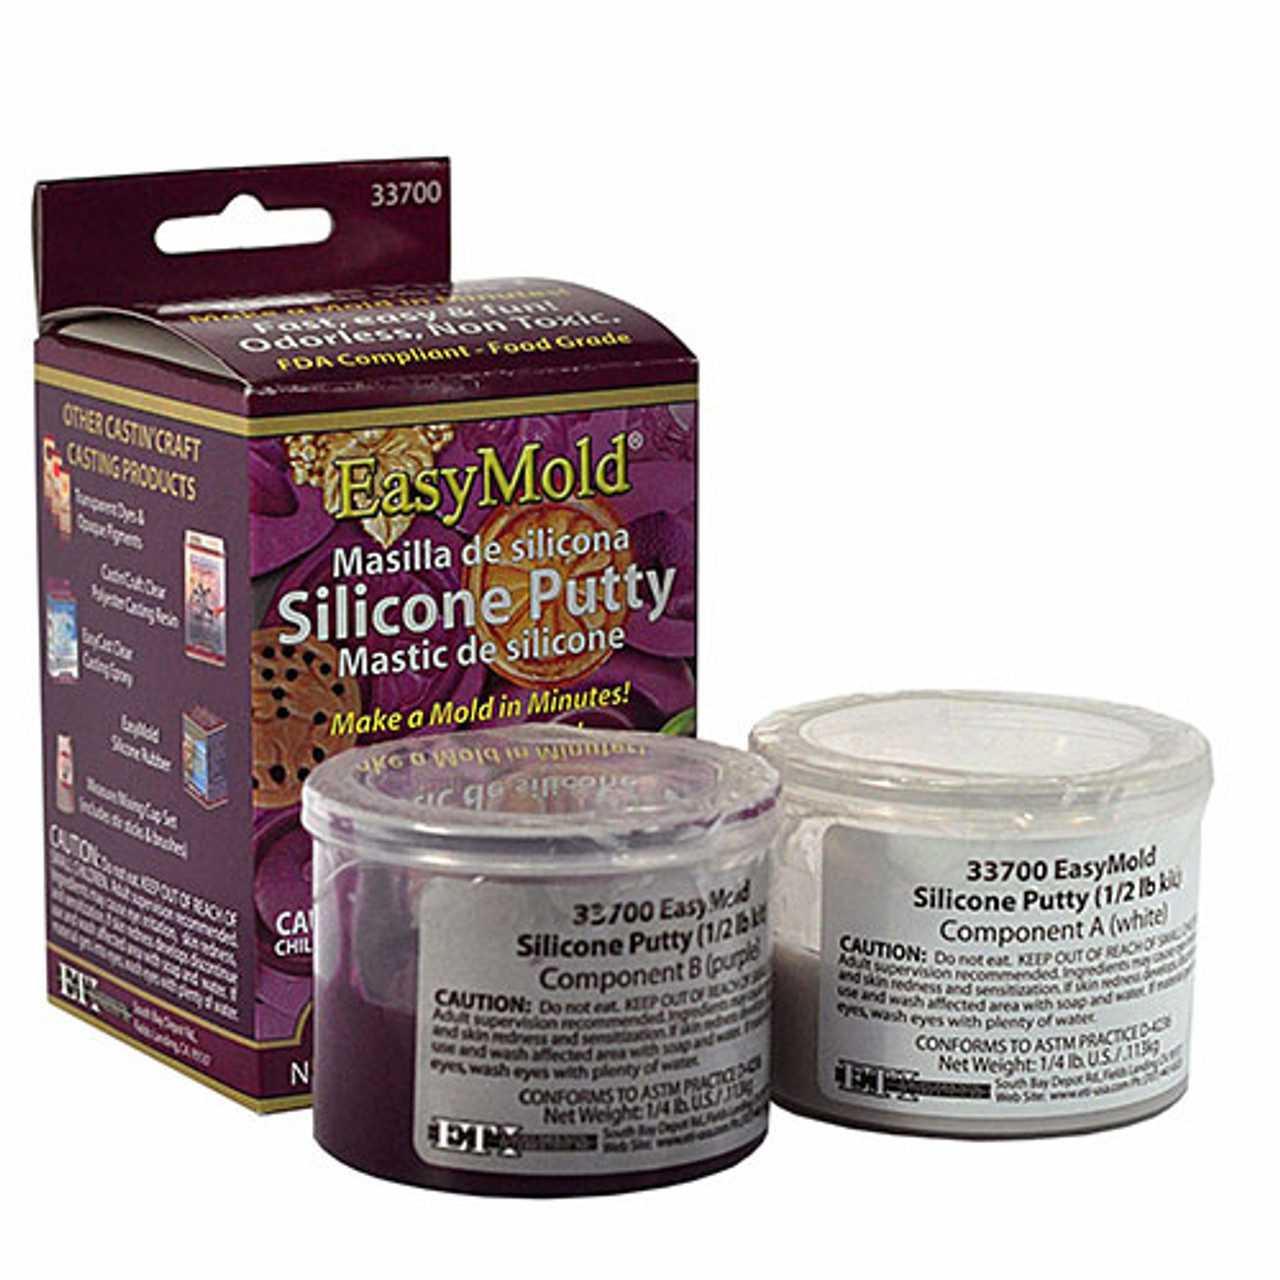 EasyMold Silicone Putty - The Compleat Sculptor